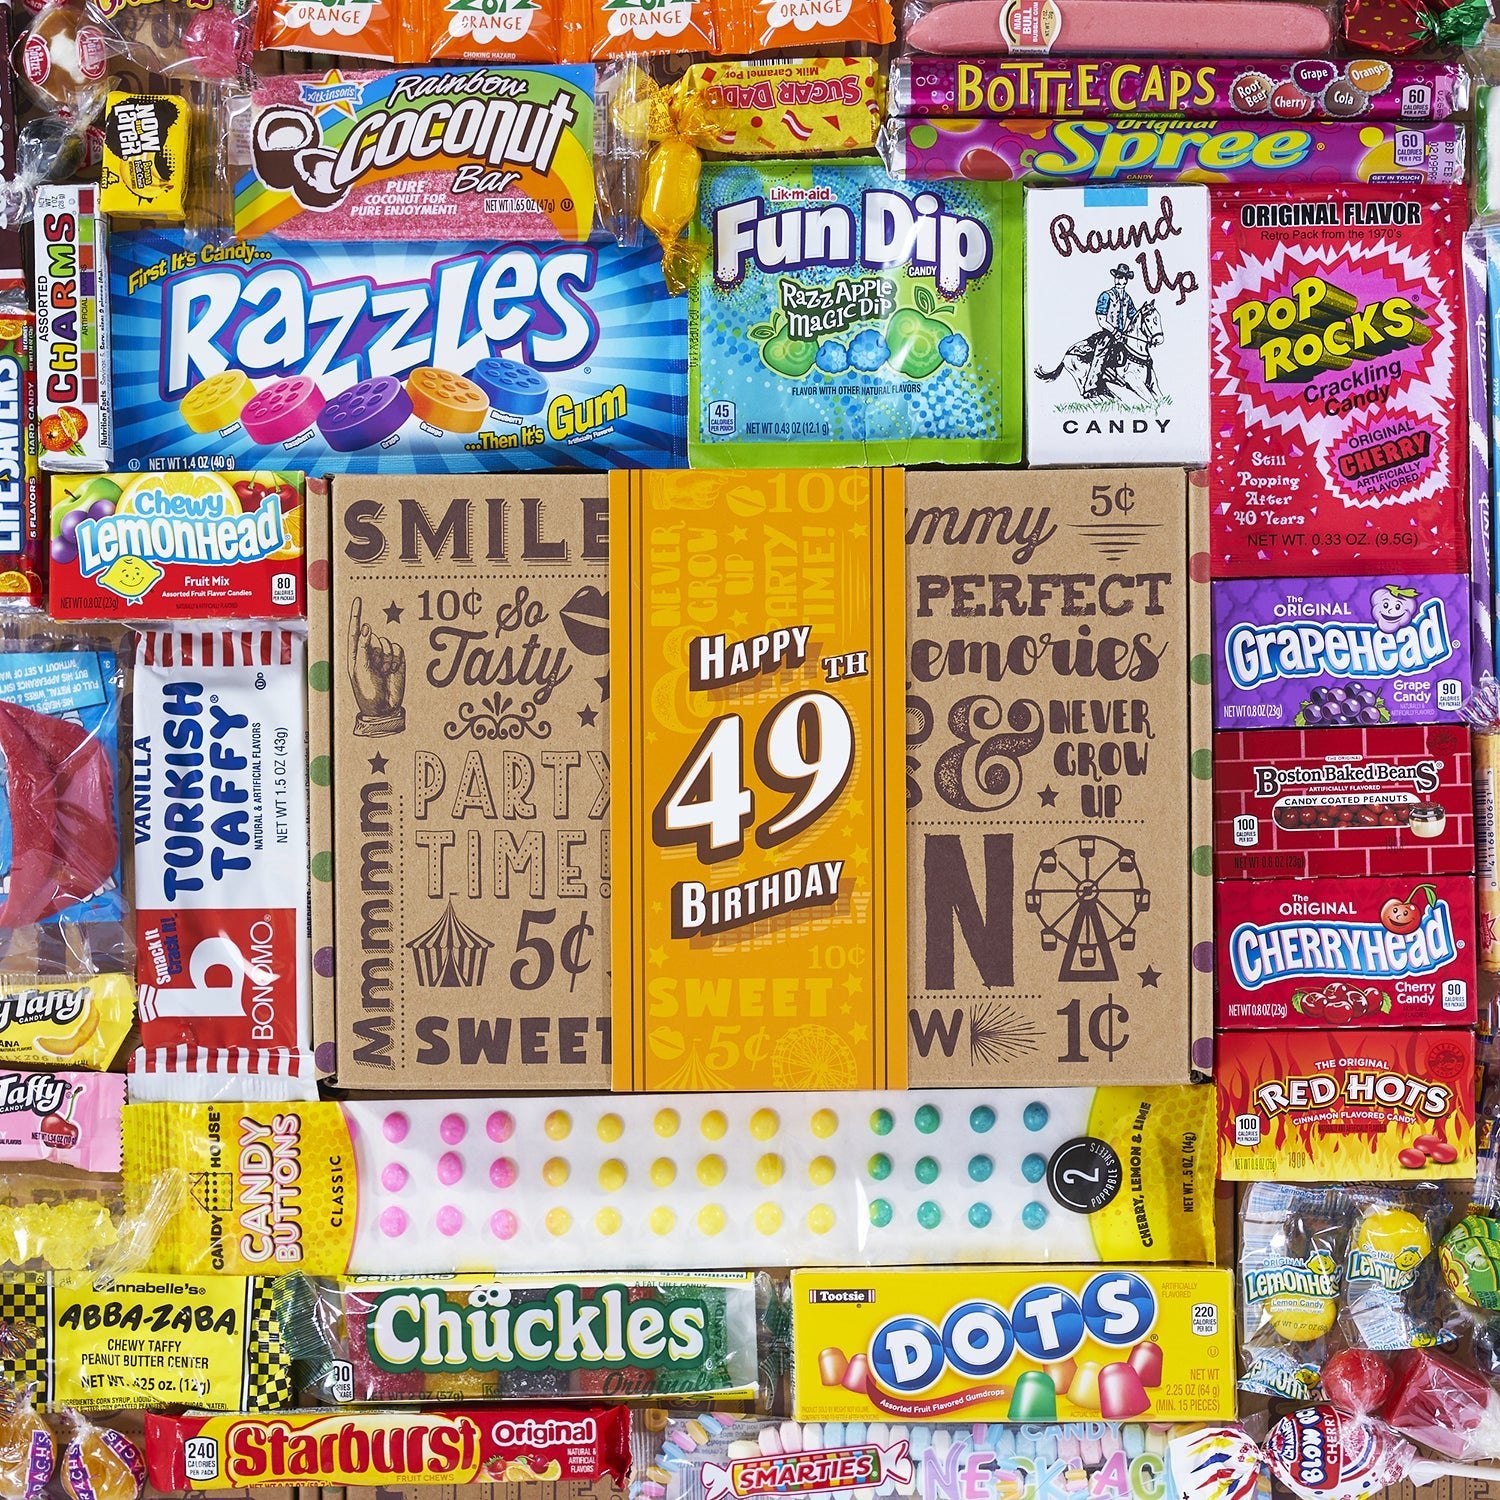 49th Birthday Retro Candy Gift - Vintage Candy Co.